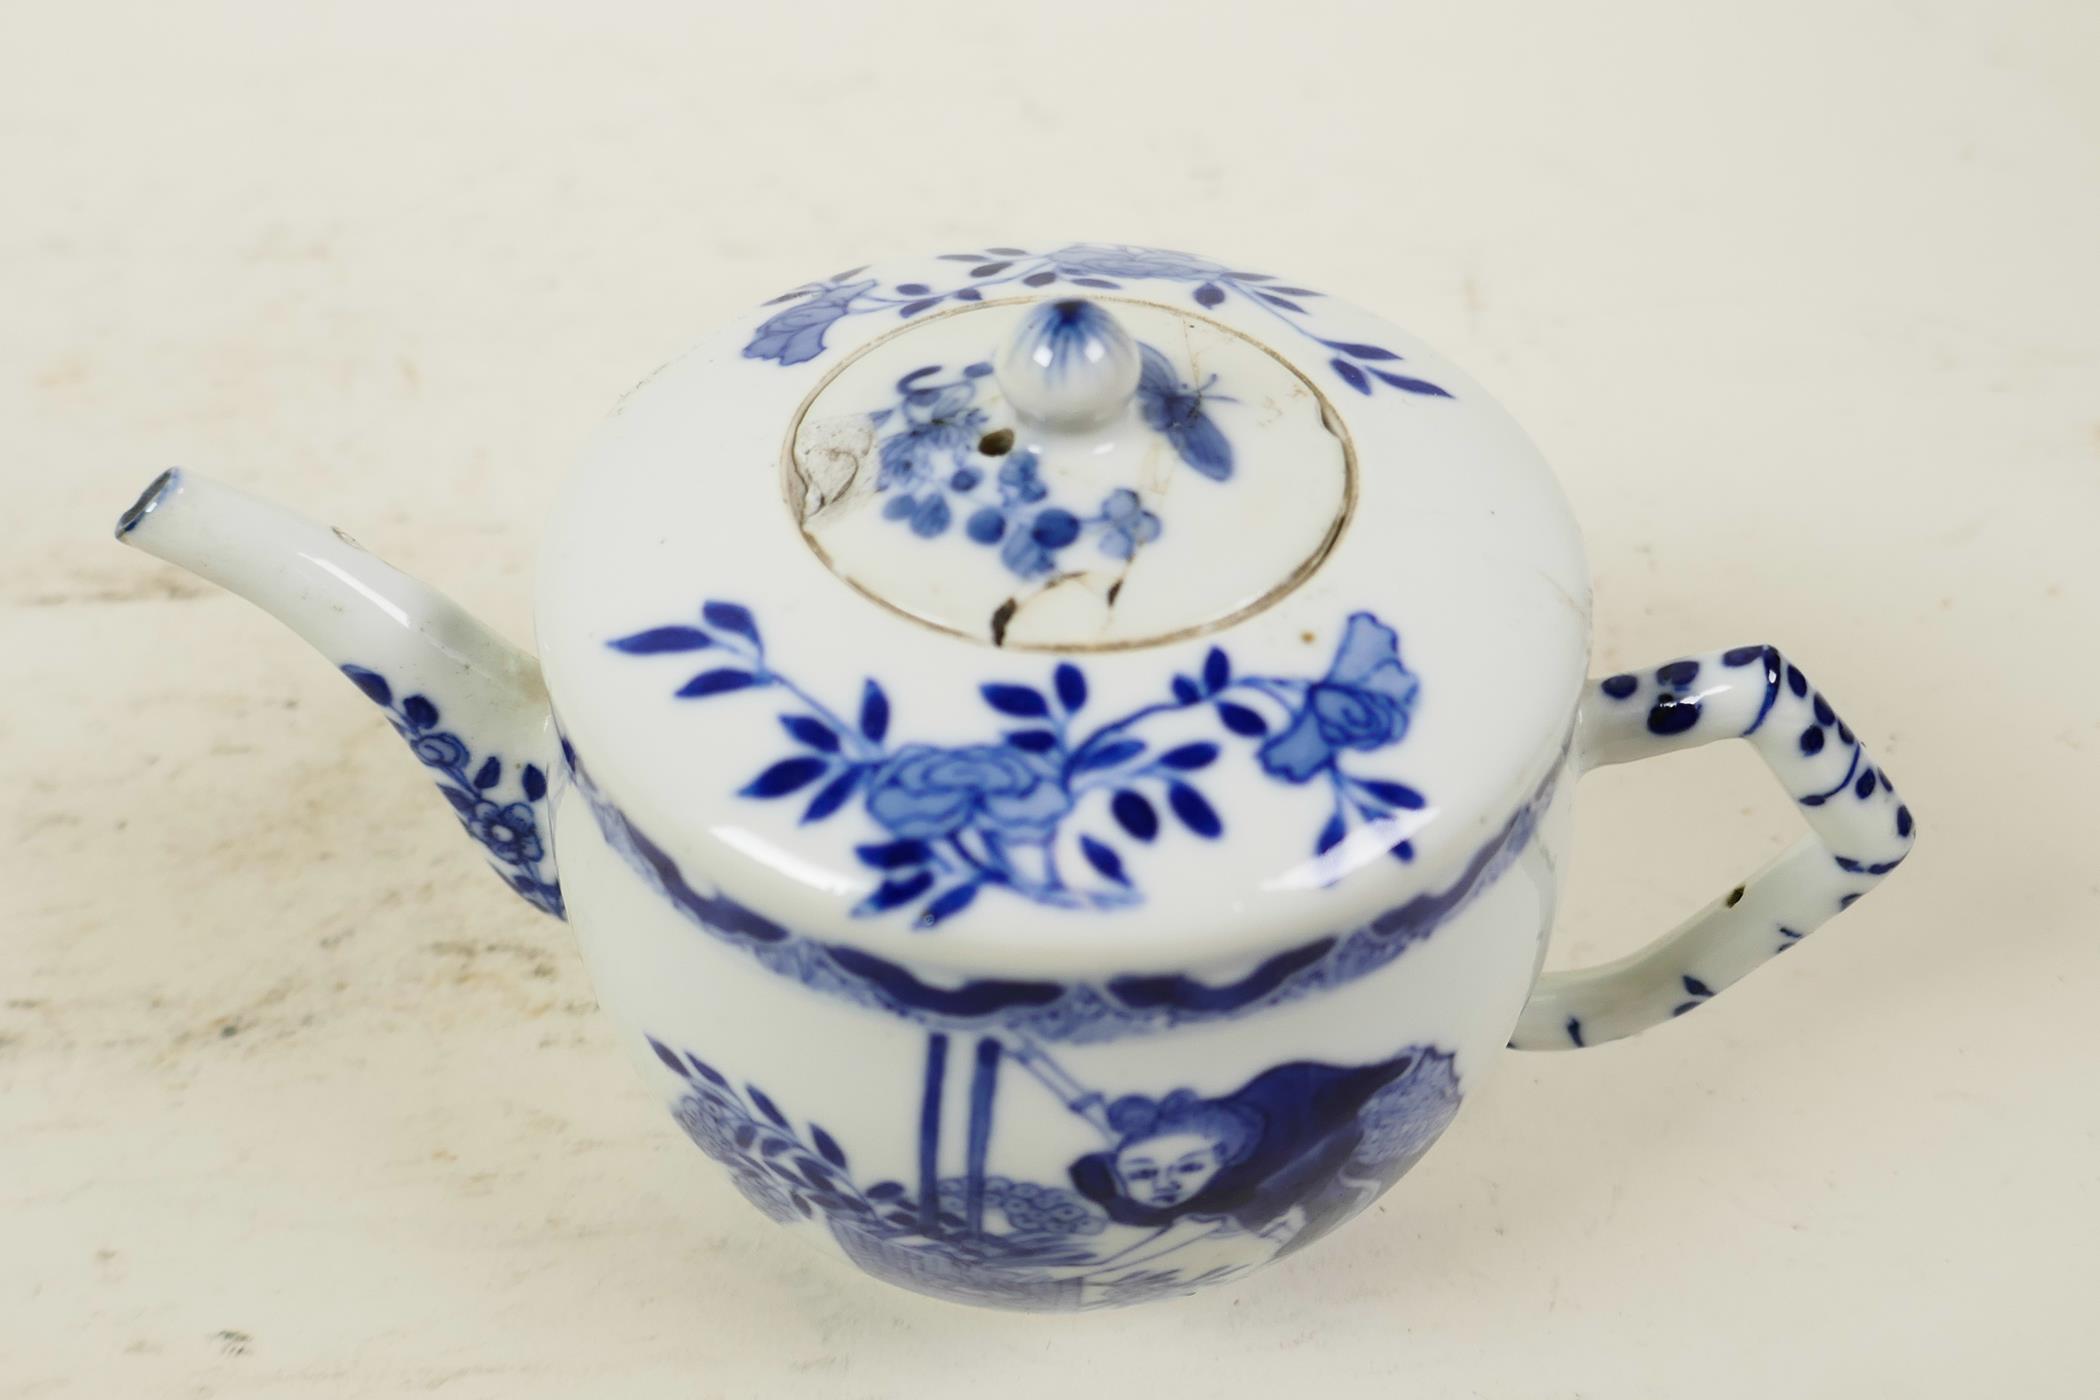 A Chinese style small blue porcelain teapot decorated with birds and blossom, A/F, 3½" high - Image 3 of 4